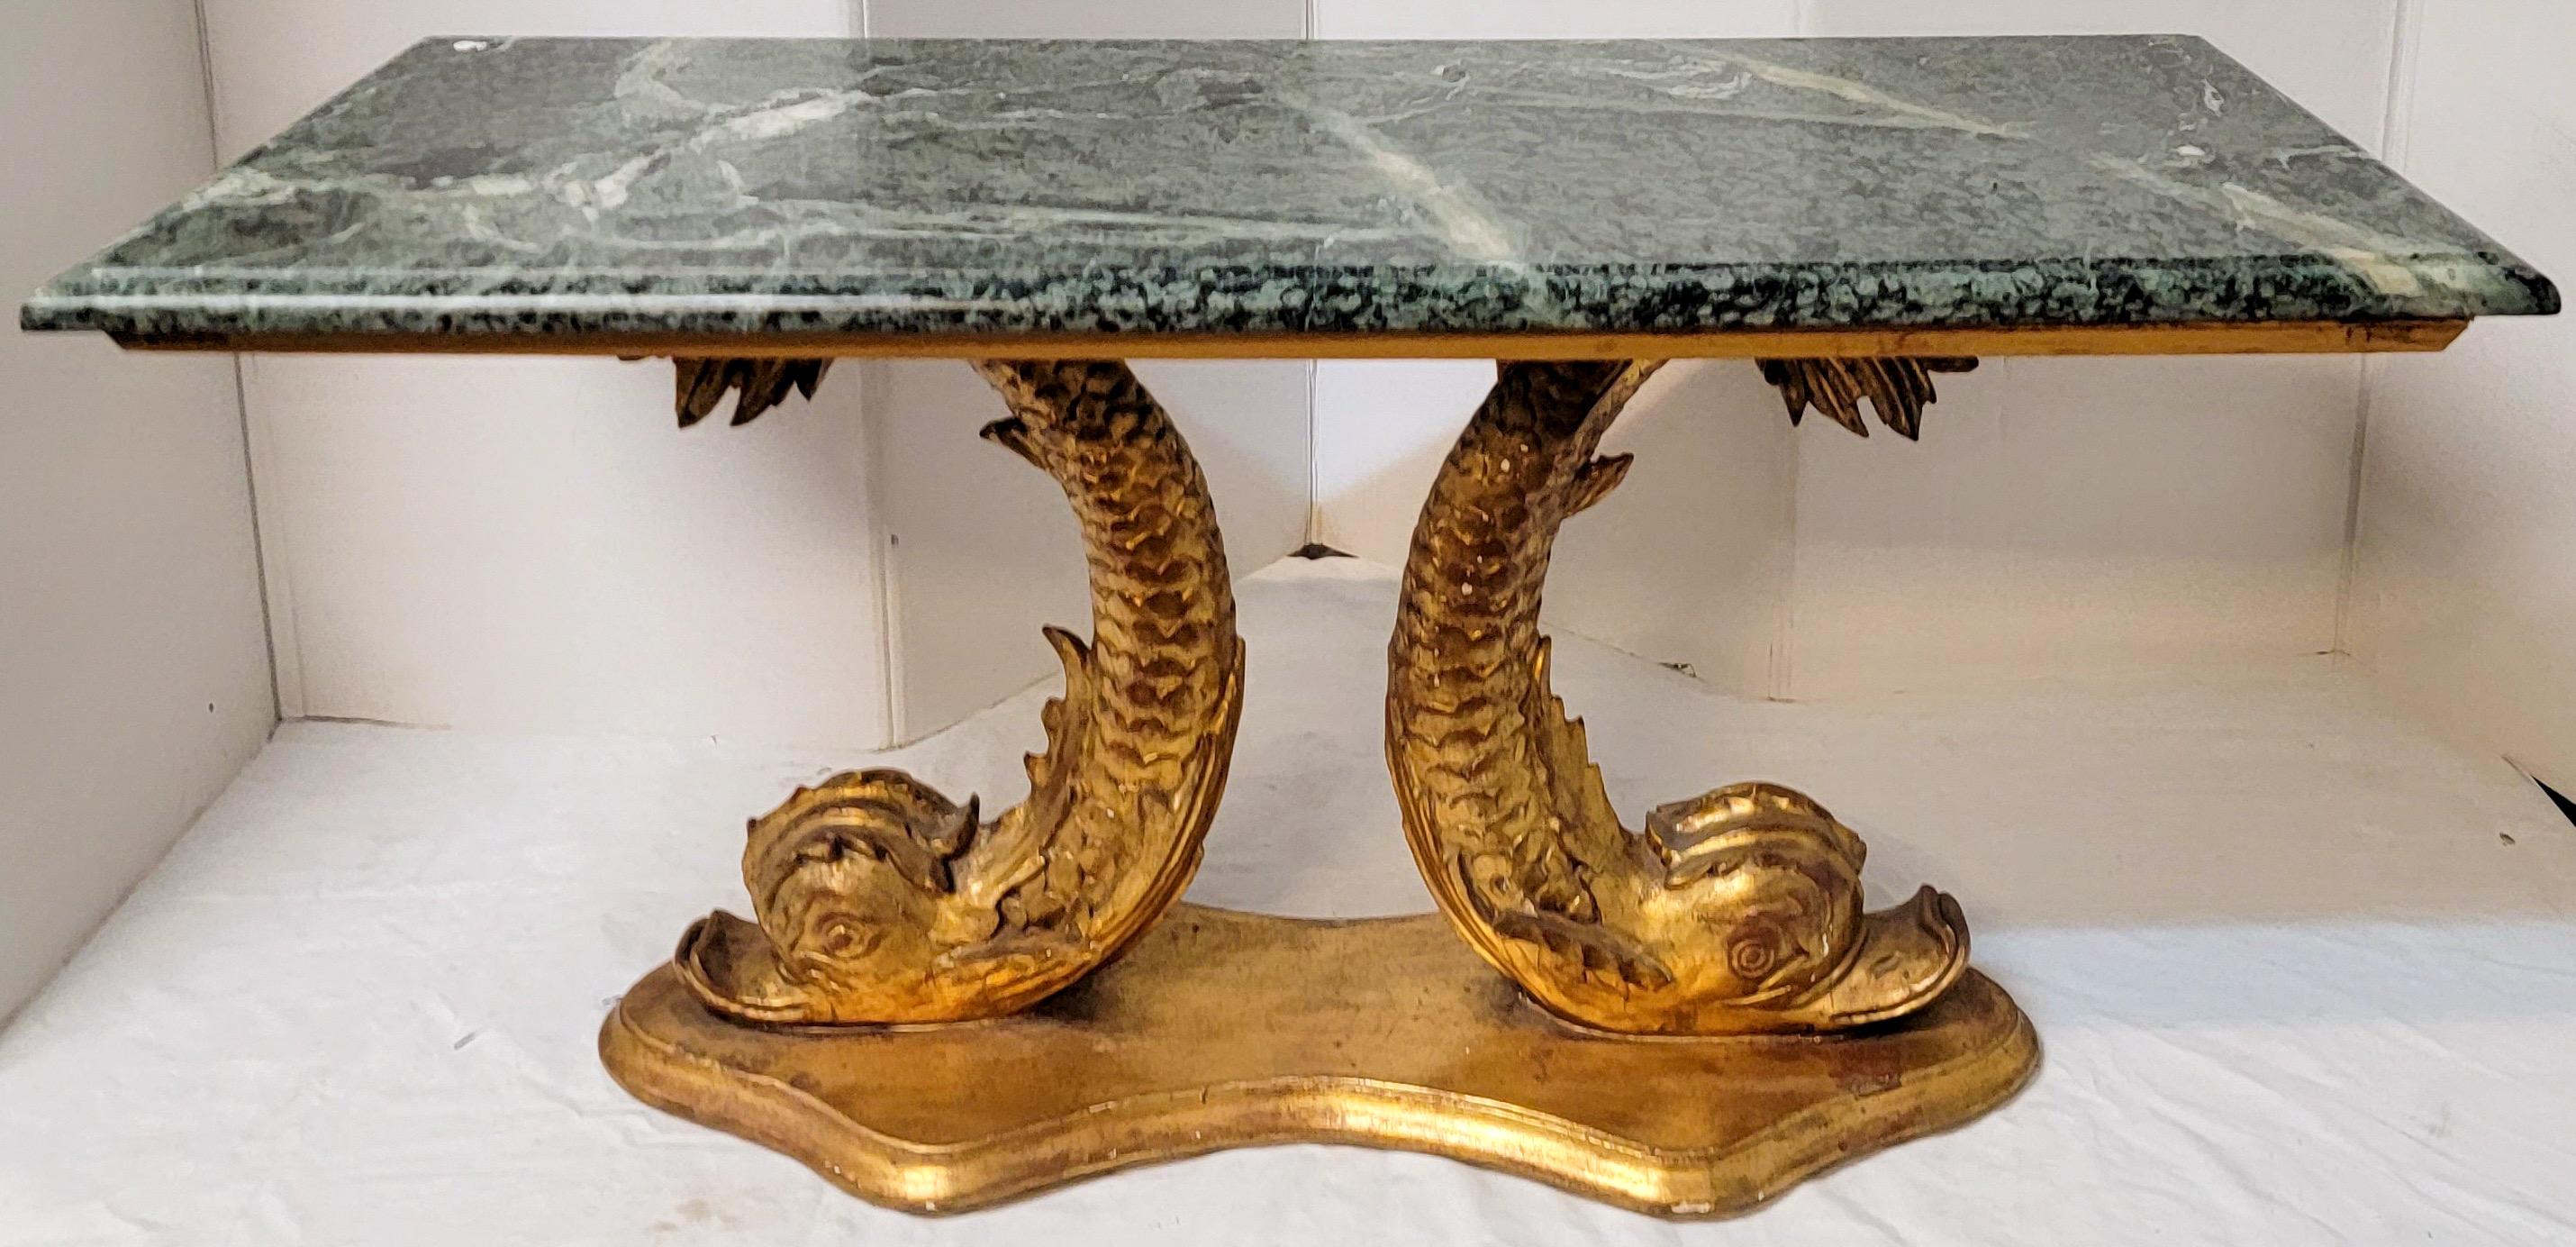 Neoclassical Neo-Classical Style Marble Top Giltwood Koi Fish Coffee Table or Bench